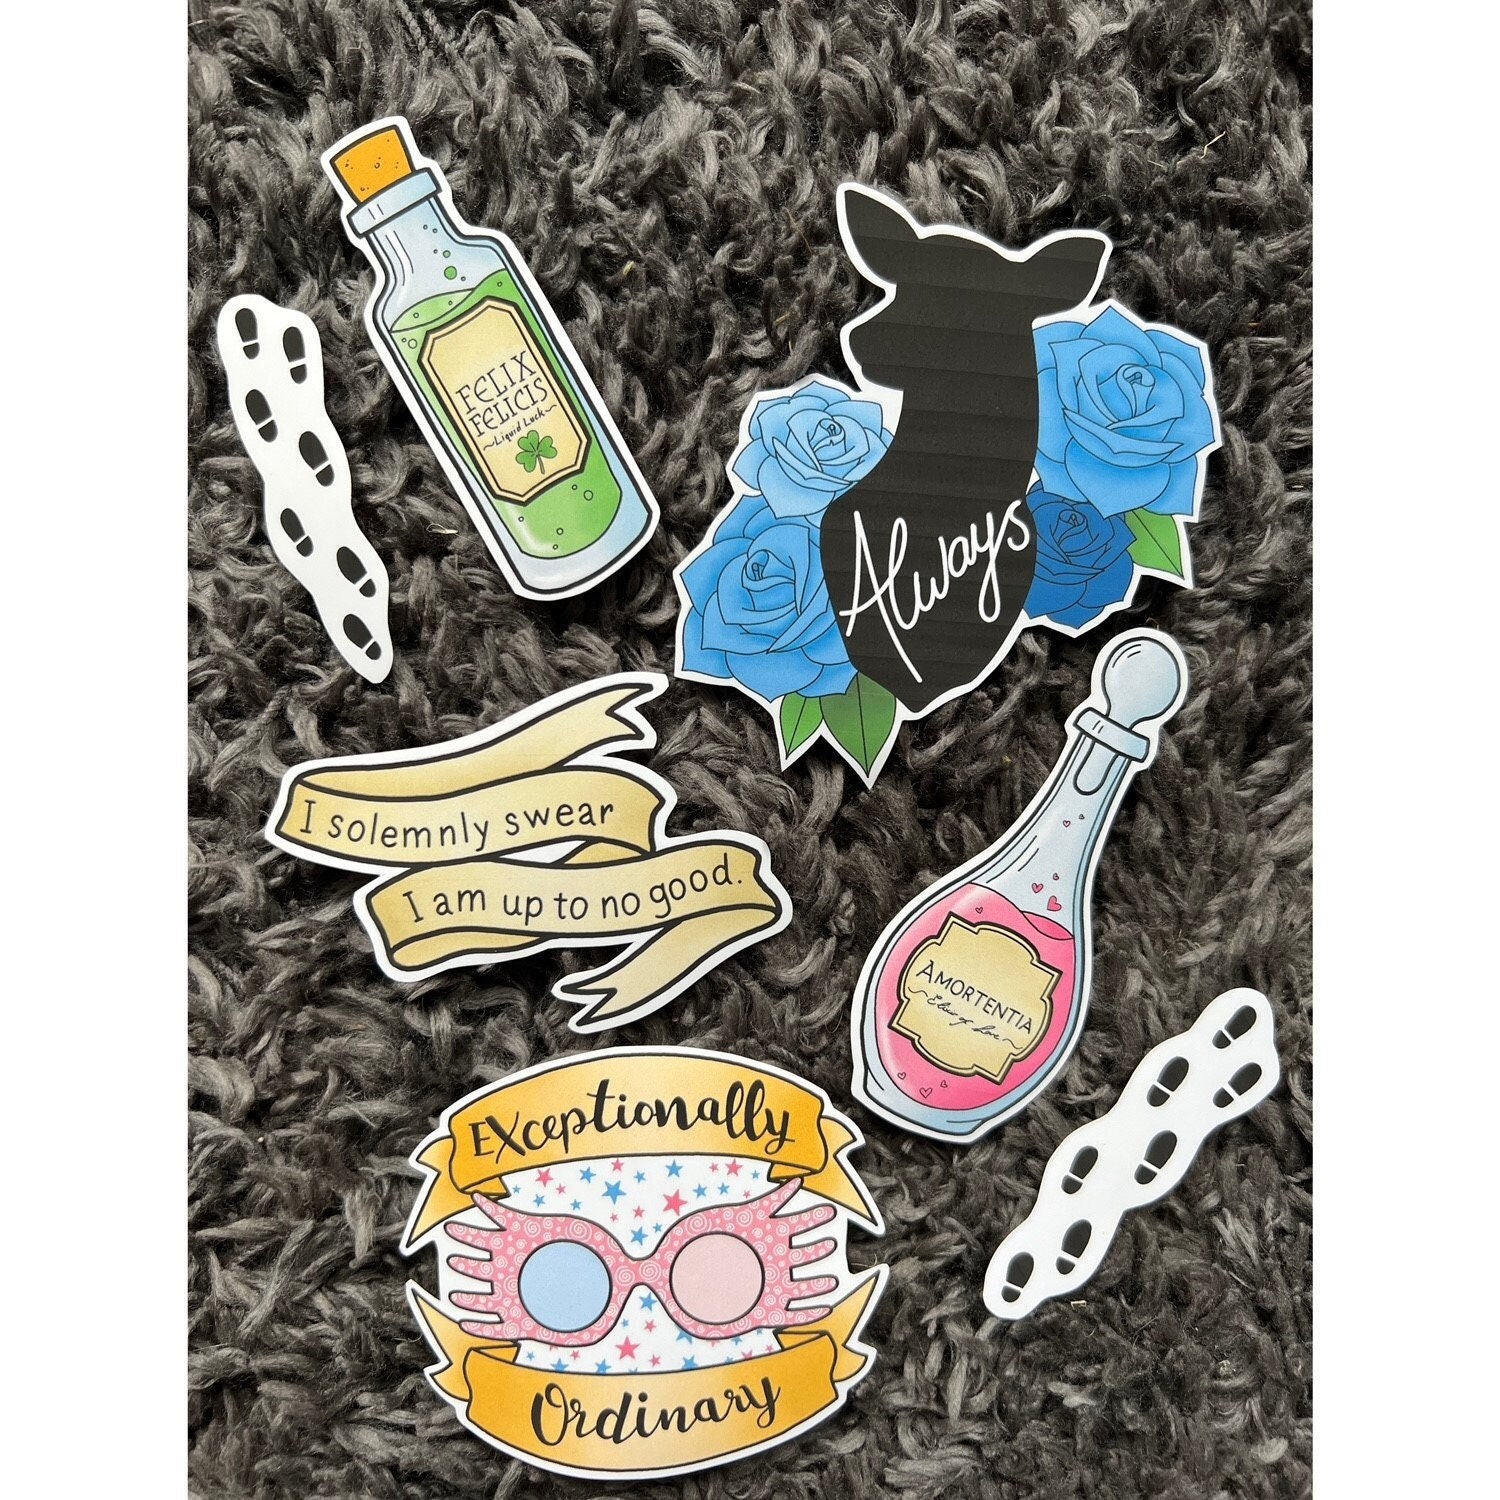 Harry Potter Stickers Pack of 21 Waterproof & Removable Gadget